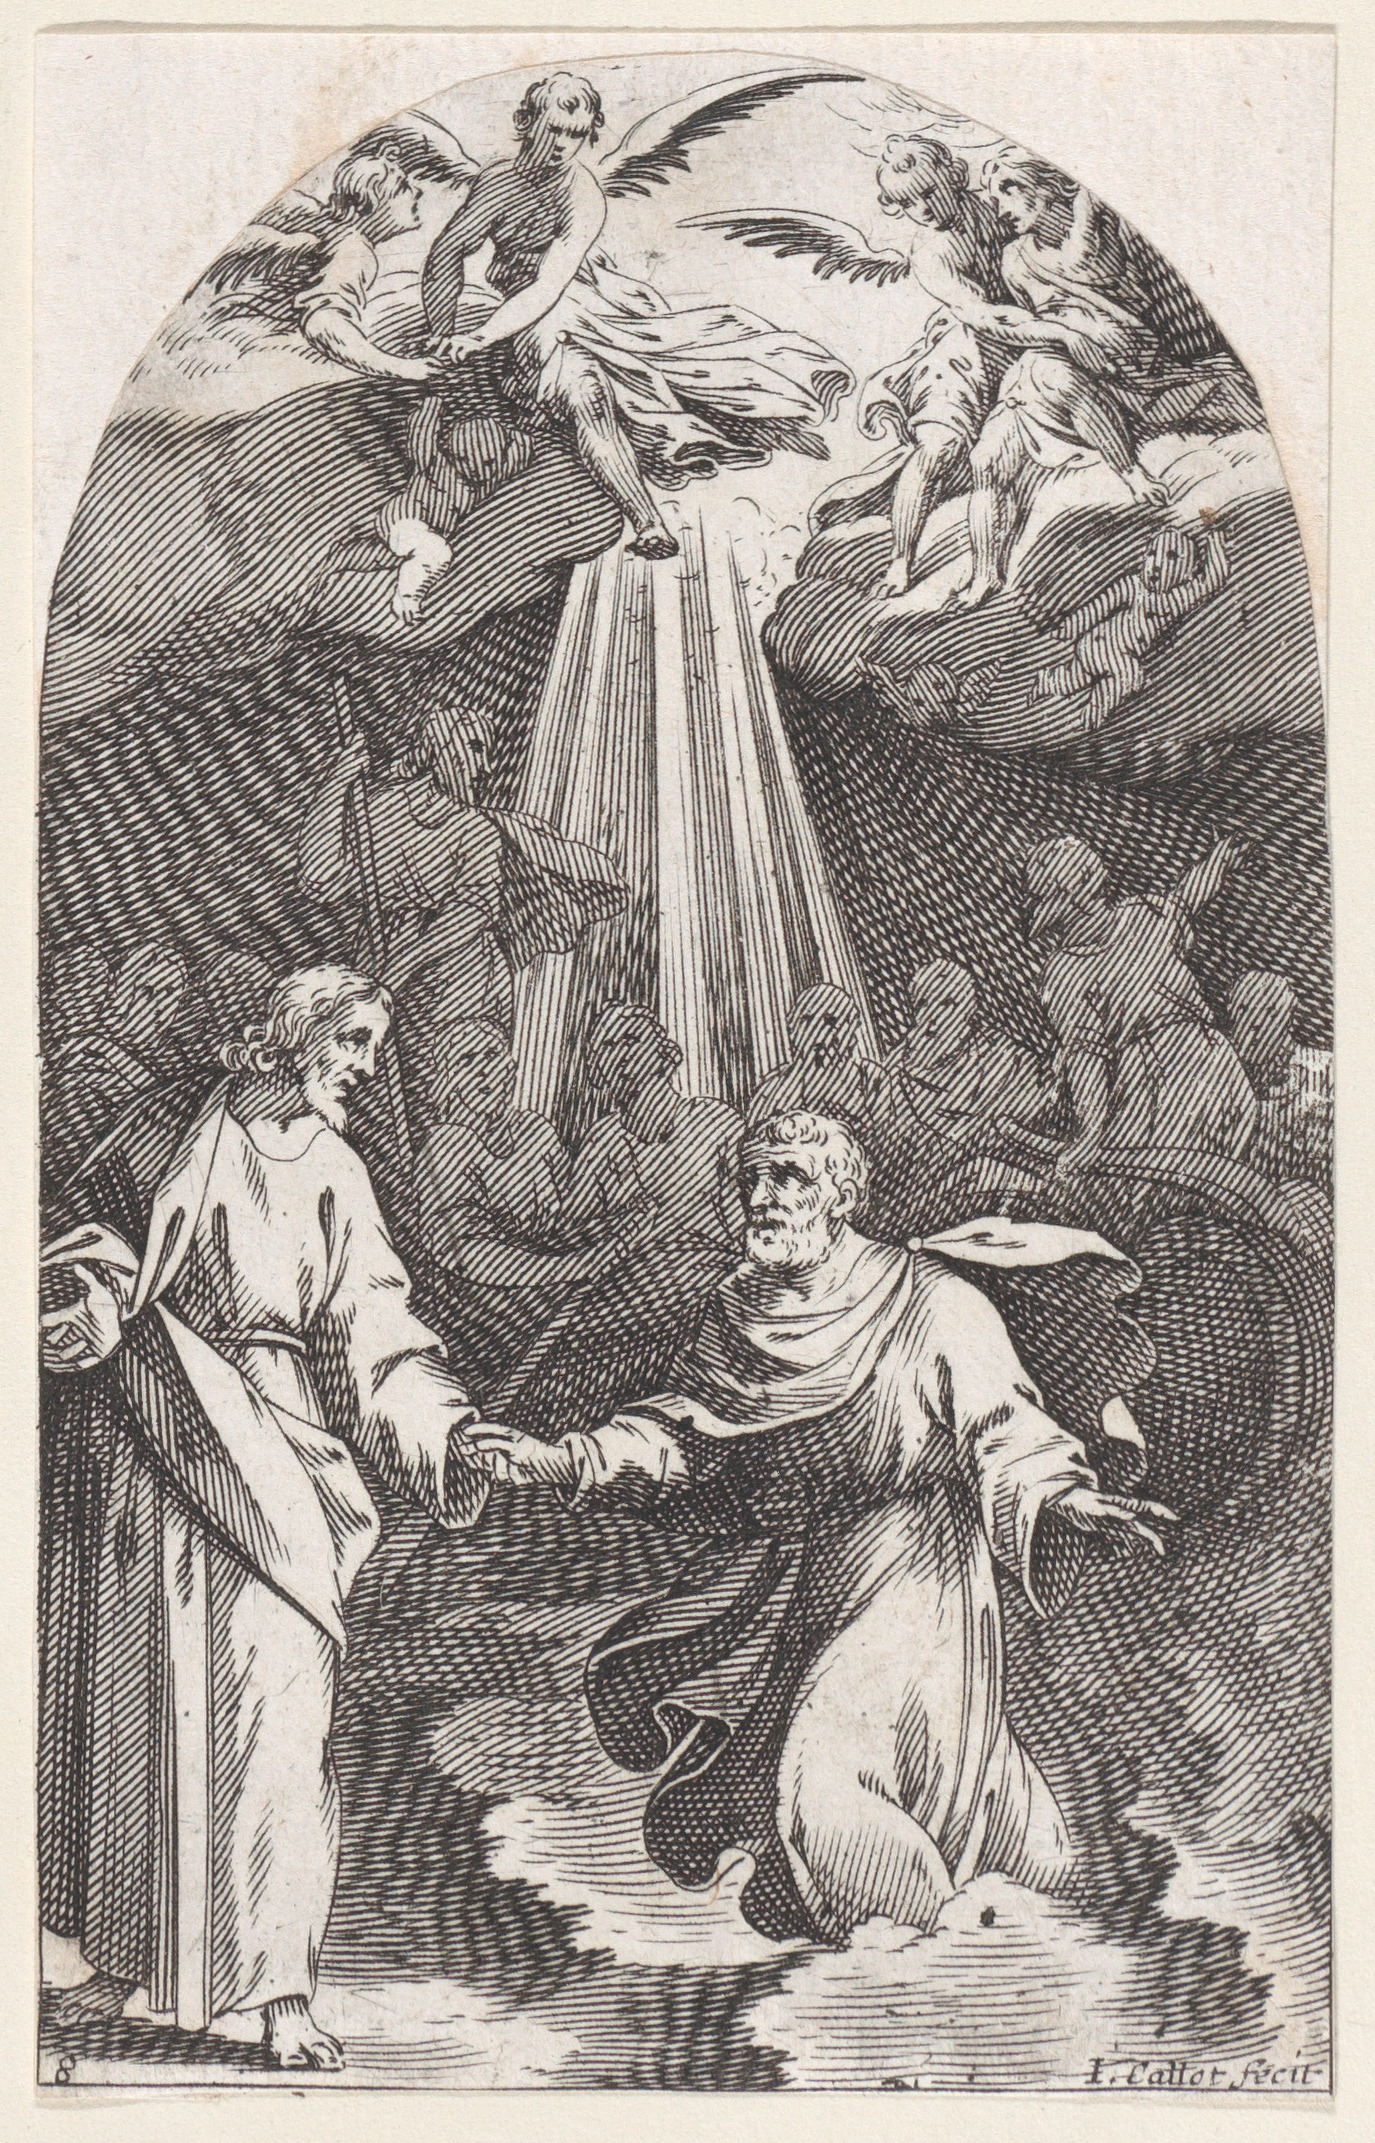 Black-and-white print of Jesus Christ taking the hand of a bearded man, with rays of light coming down from a heaven-like scene above.